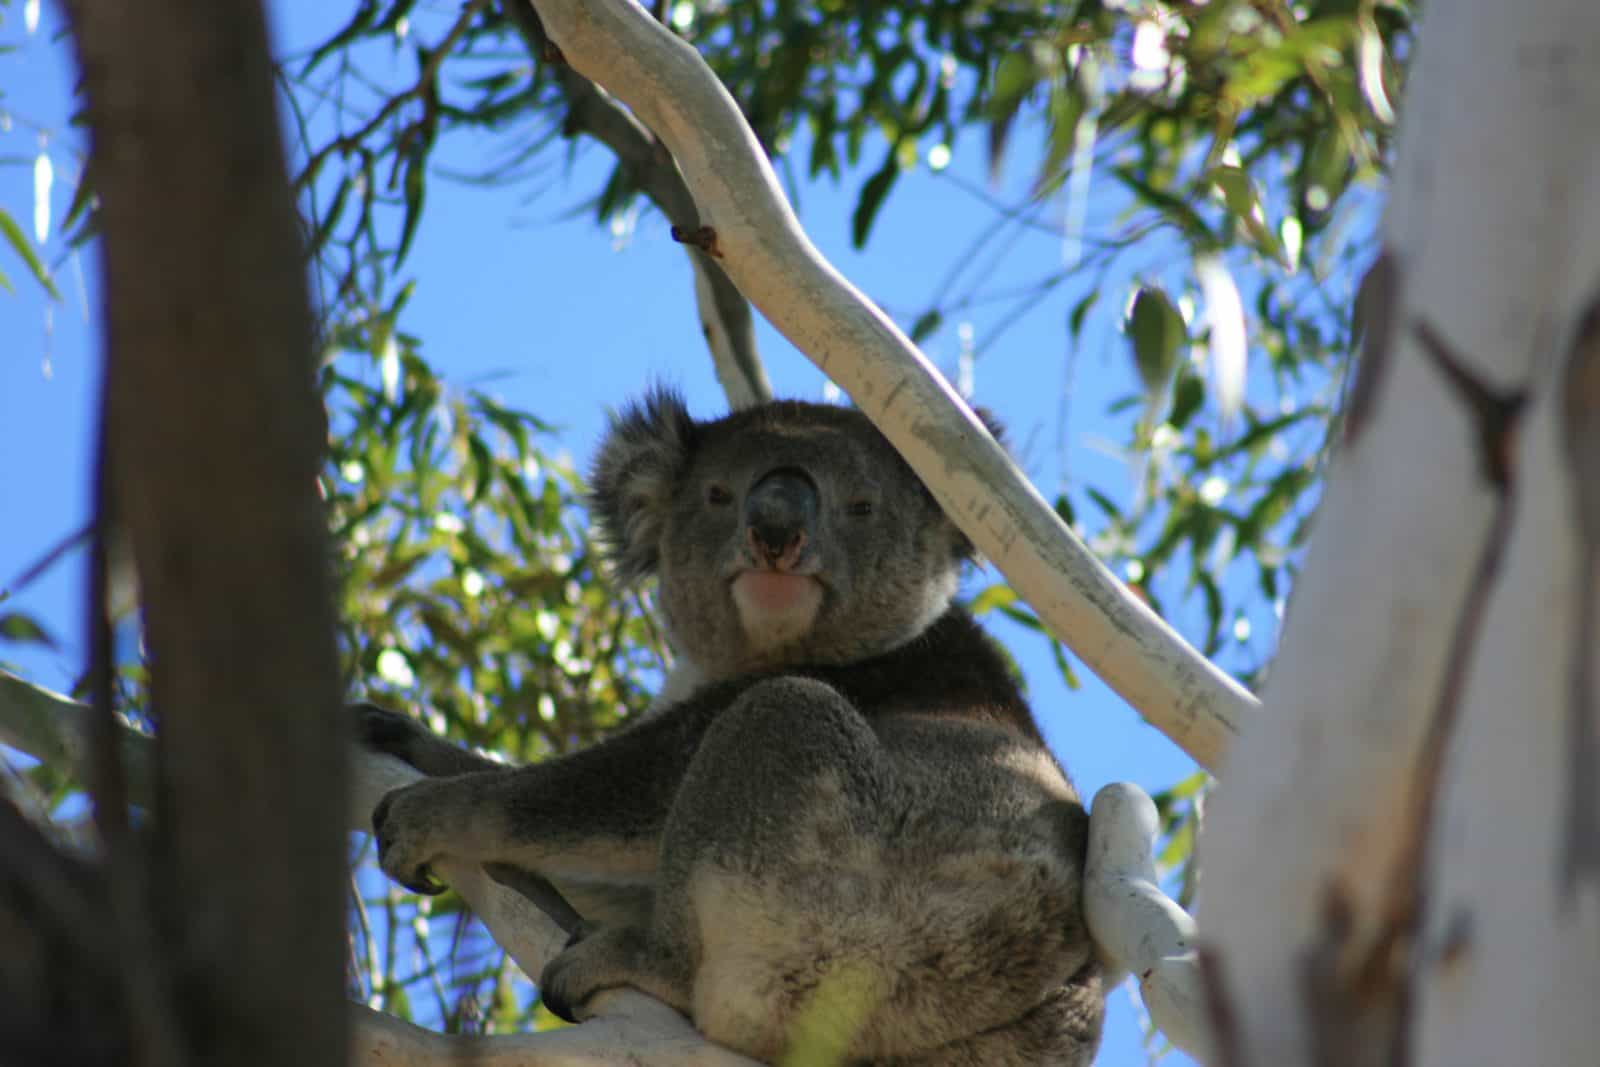 We are very lucky to have visits from local Koalas.